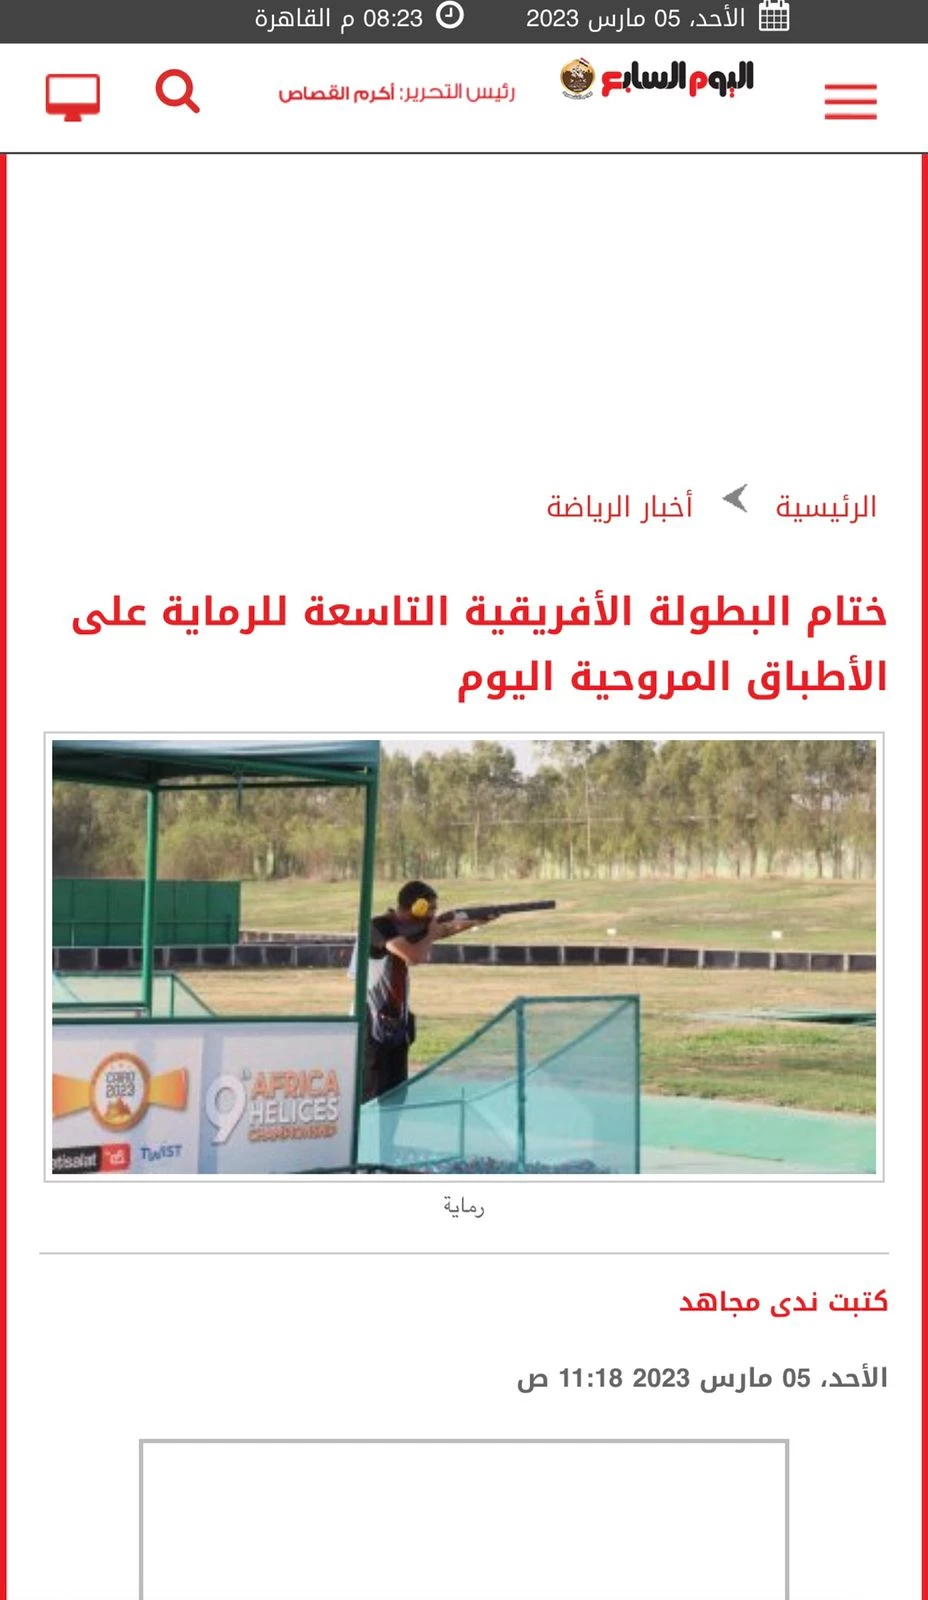 The student Mahmoud Khaled Abdel-Aal, a first-year student at the Faculty of Human Medicine, achieved fourth place in the 9th African Helice Shooting Championship3